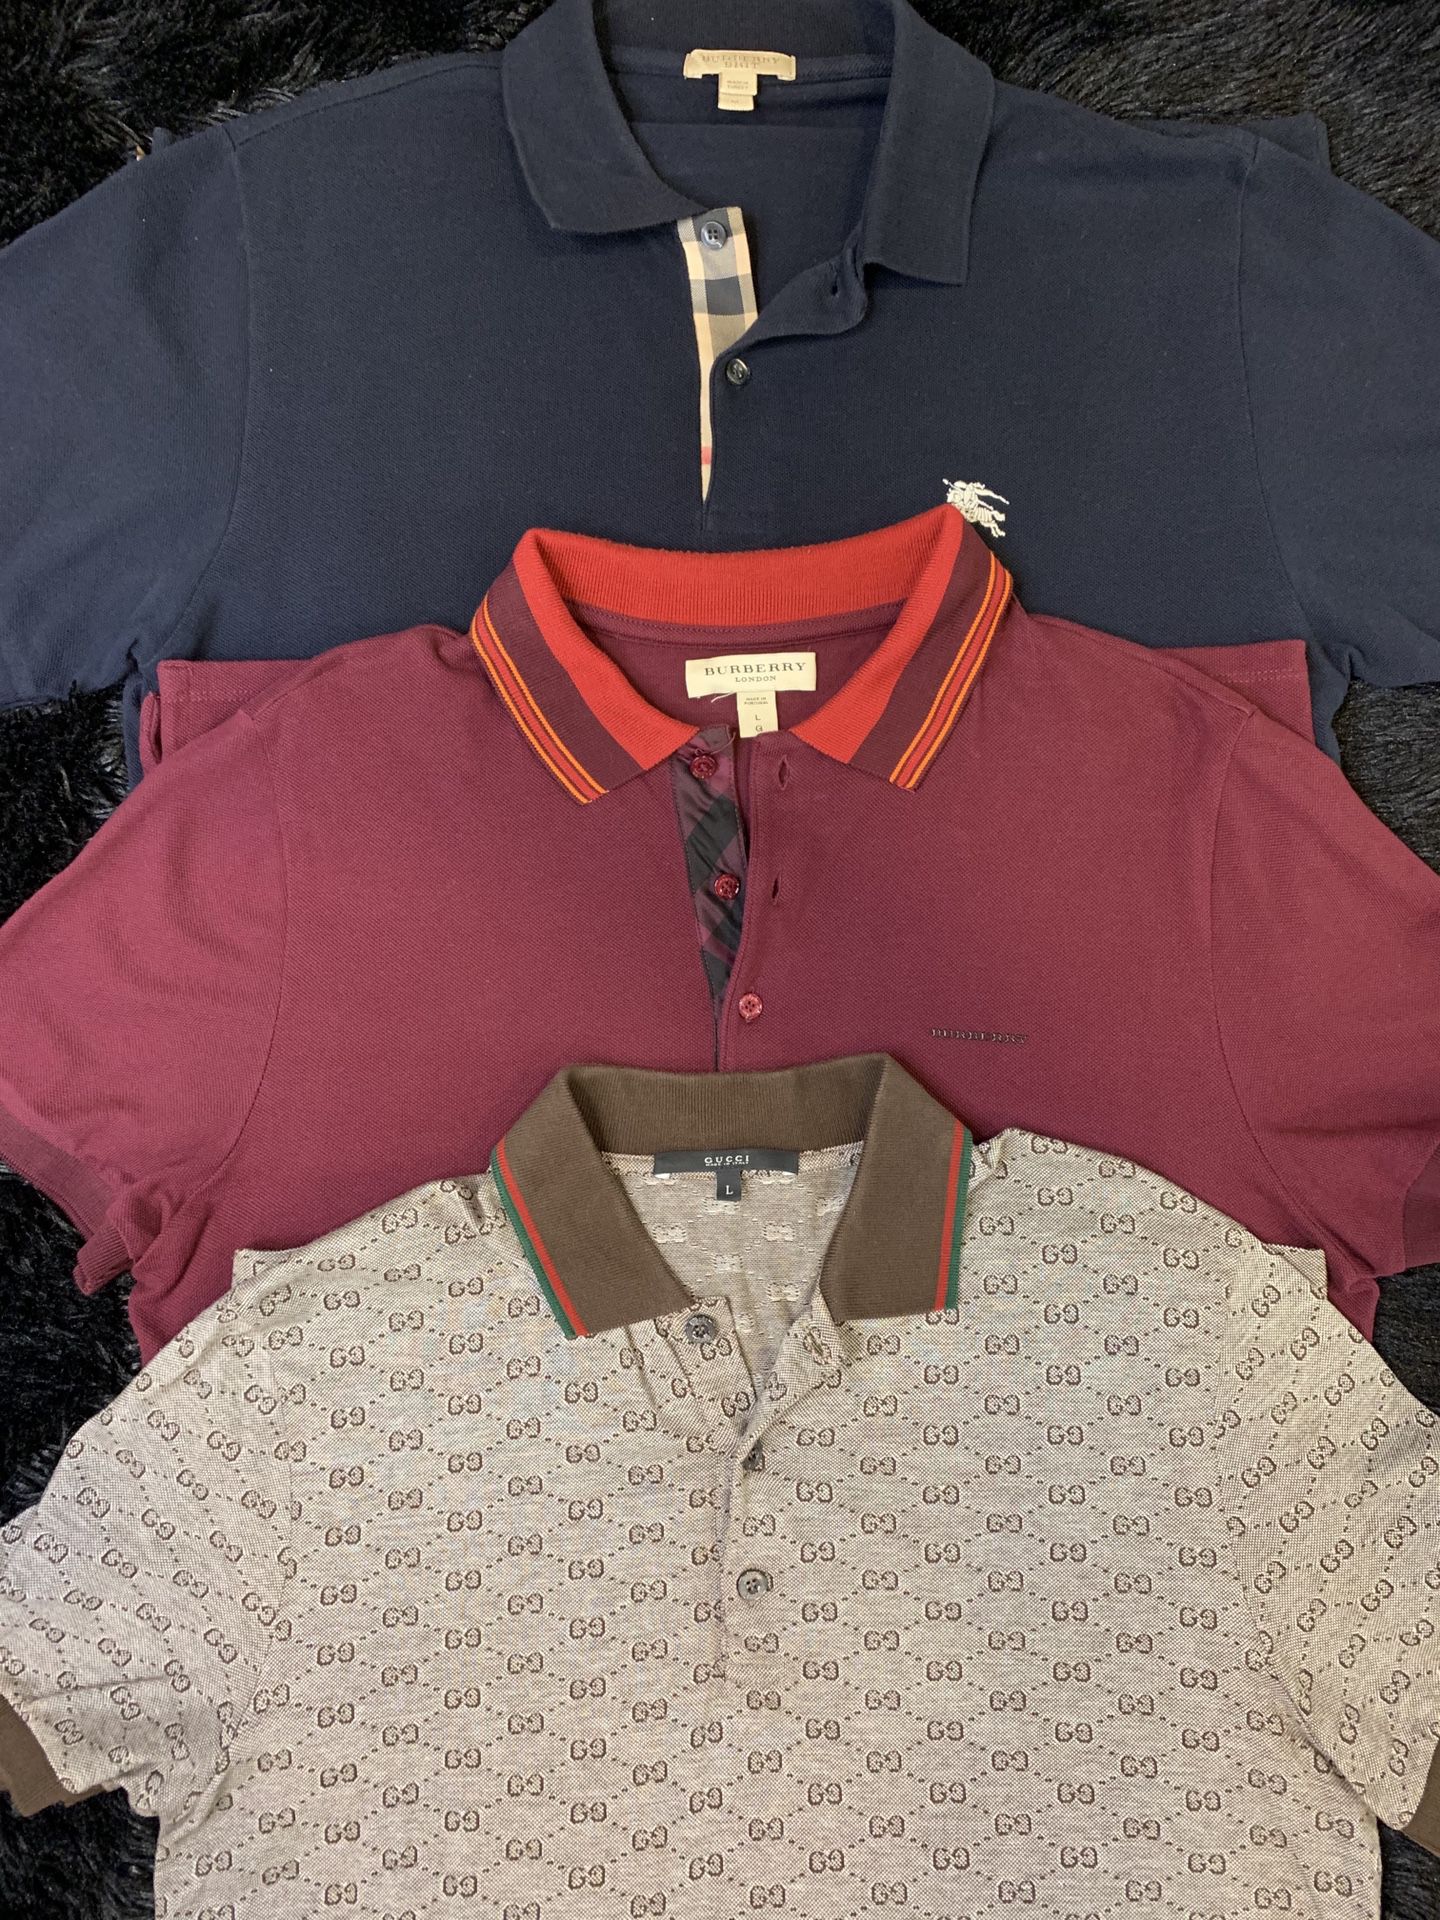 Authentic Designer Polos Shirts (2 Burberry & 1 Gucci)